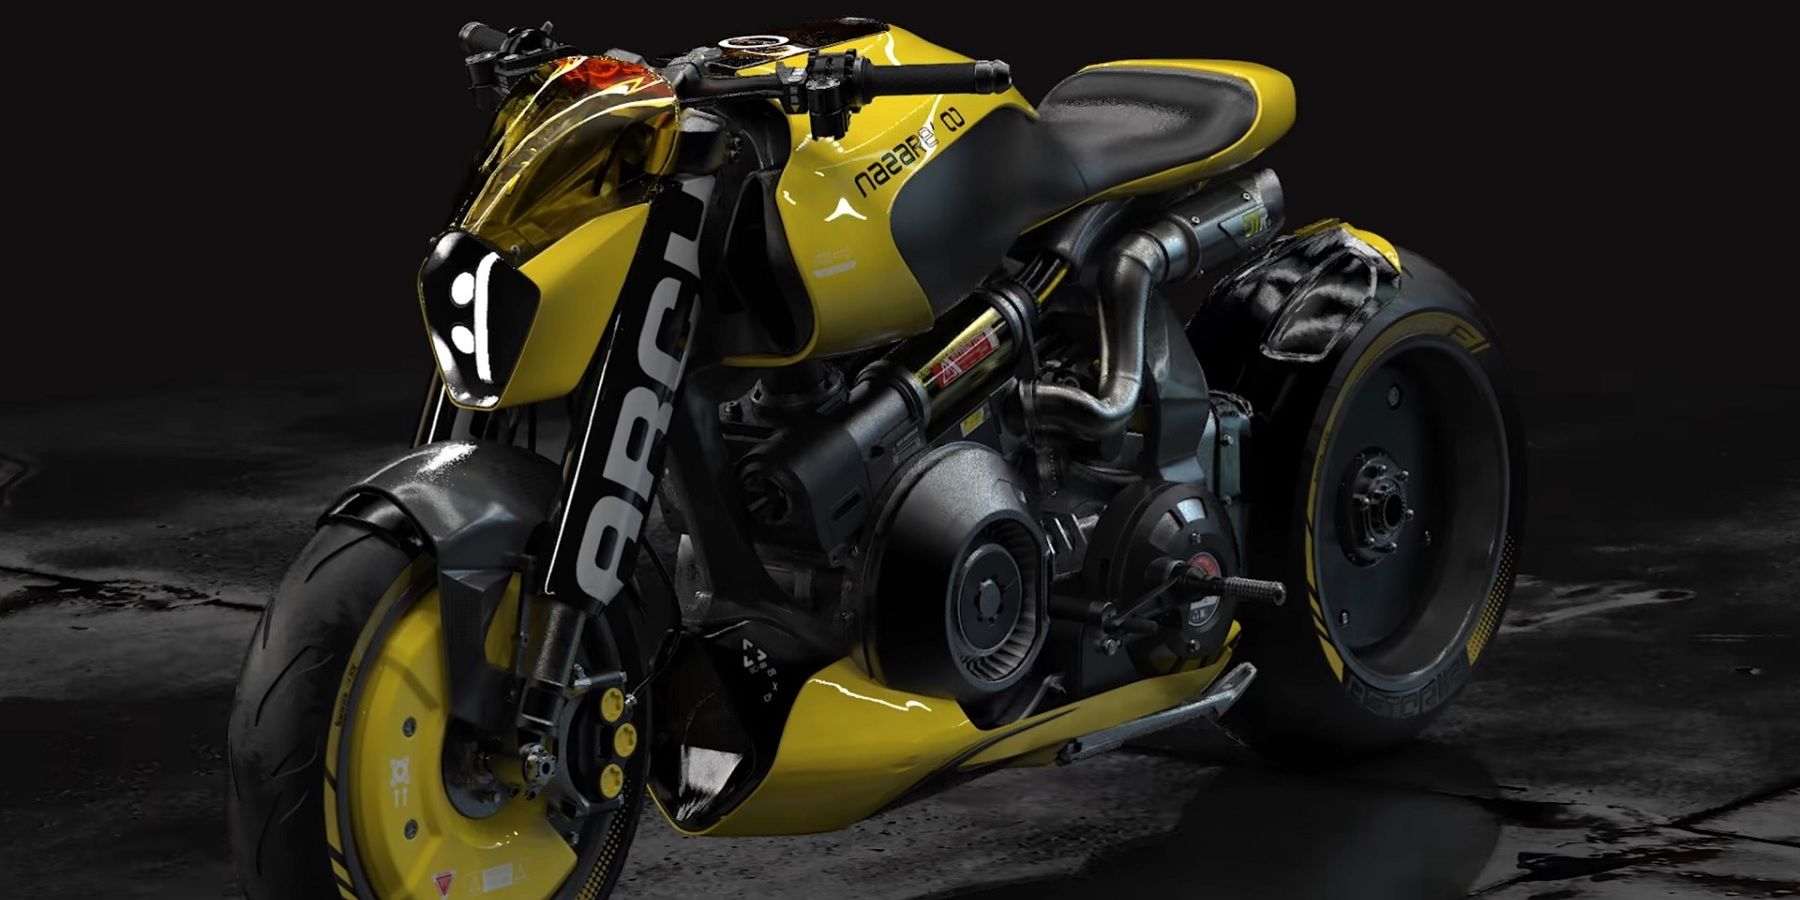 One of the motorcycles from Cyberpunk 2077 based on a model by Keanu Reeves' company Arch Motorcycle.